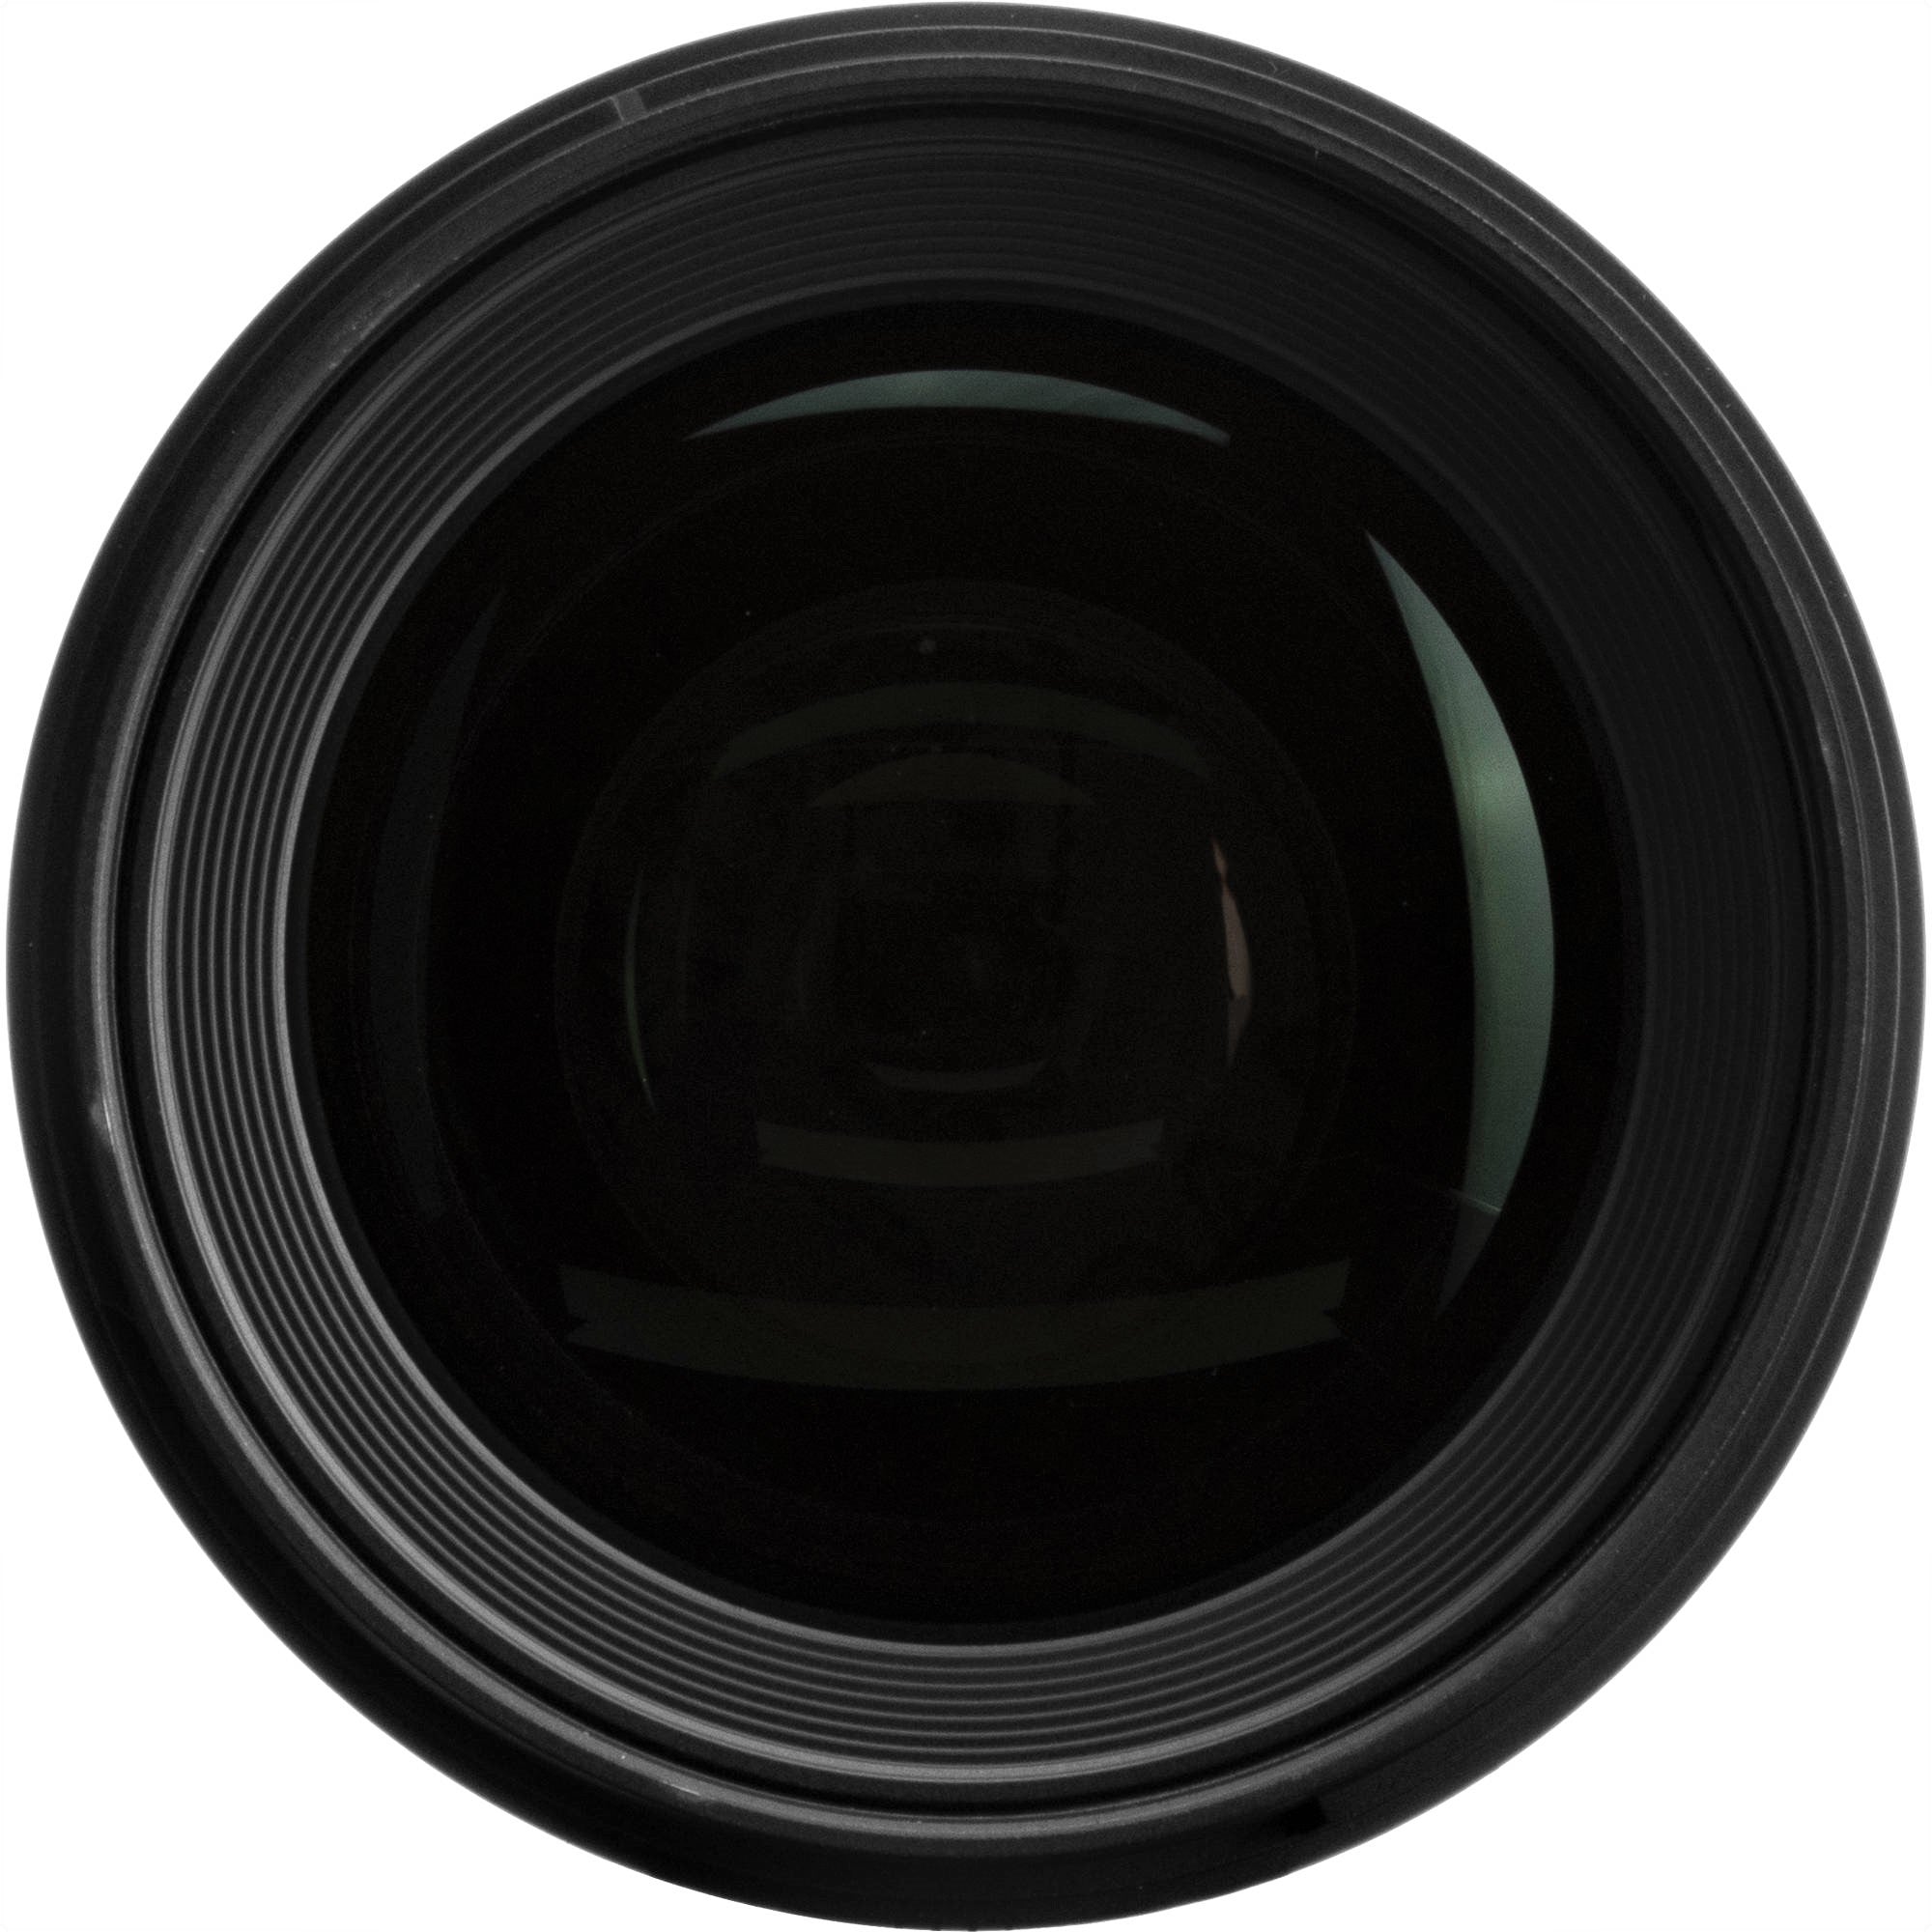 Sigma 50mm F1.4 DG HSM Art Lens for Leica L in a Front Close-Up View